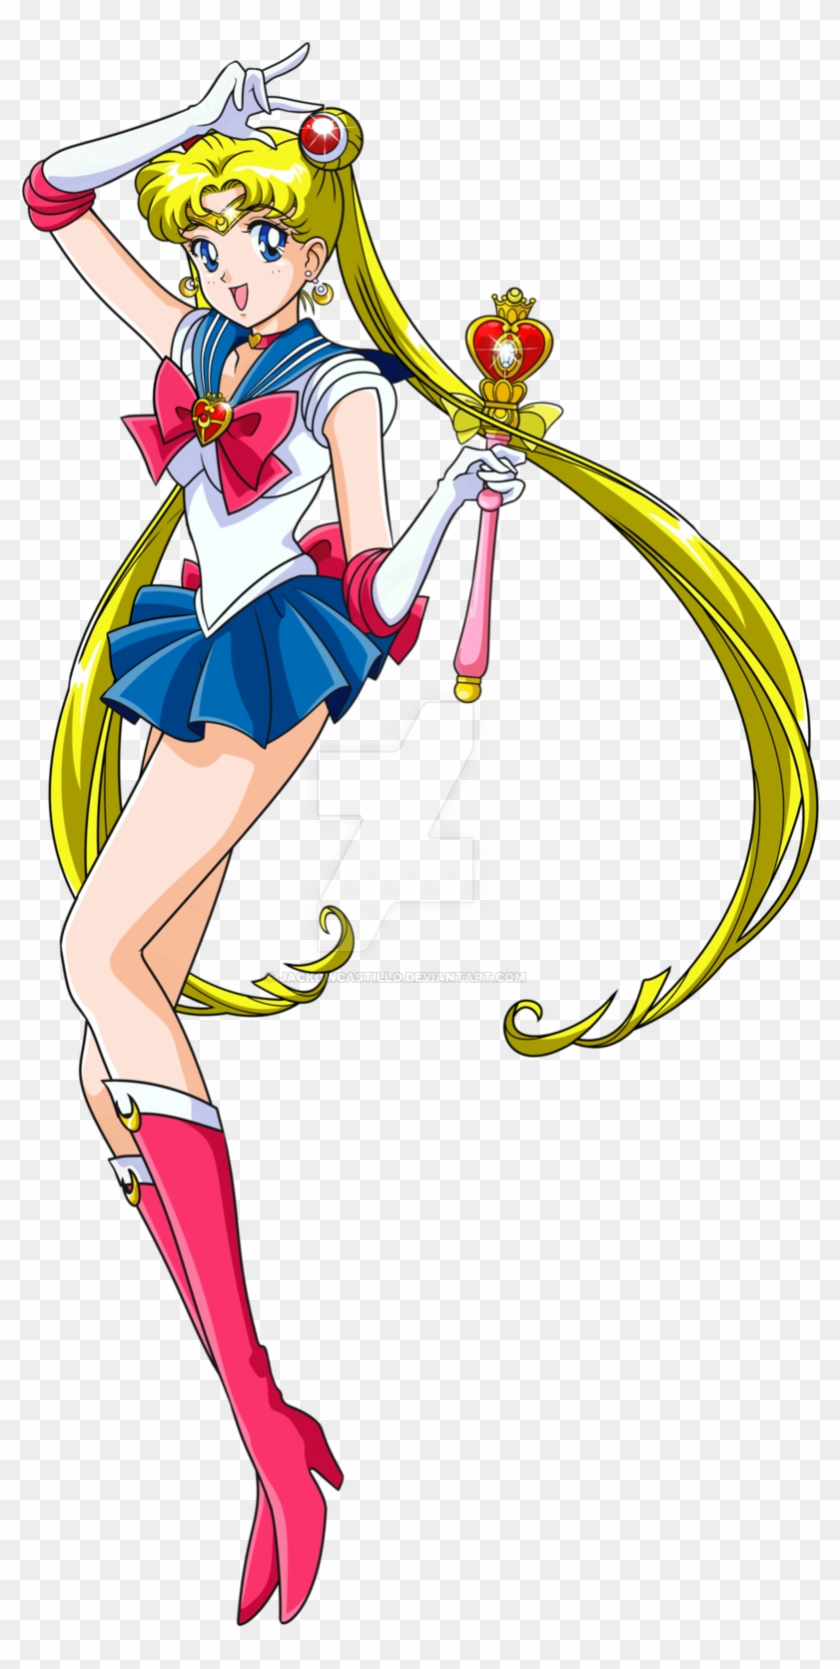 Related Image - Sailor Moon S Sailor Moon #1034293